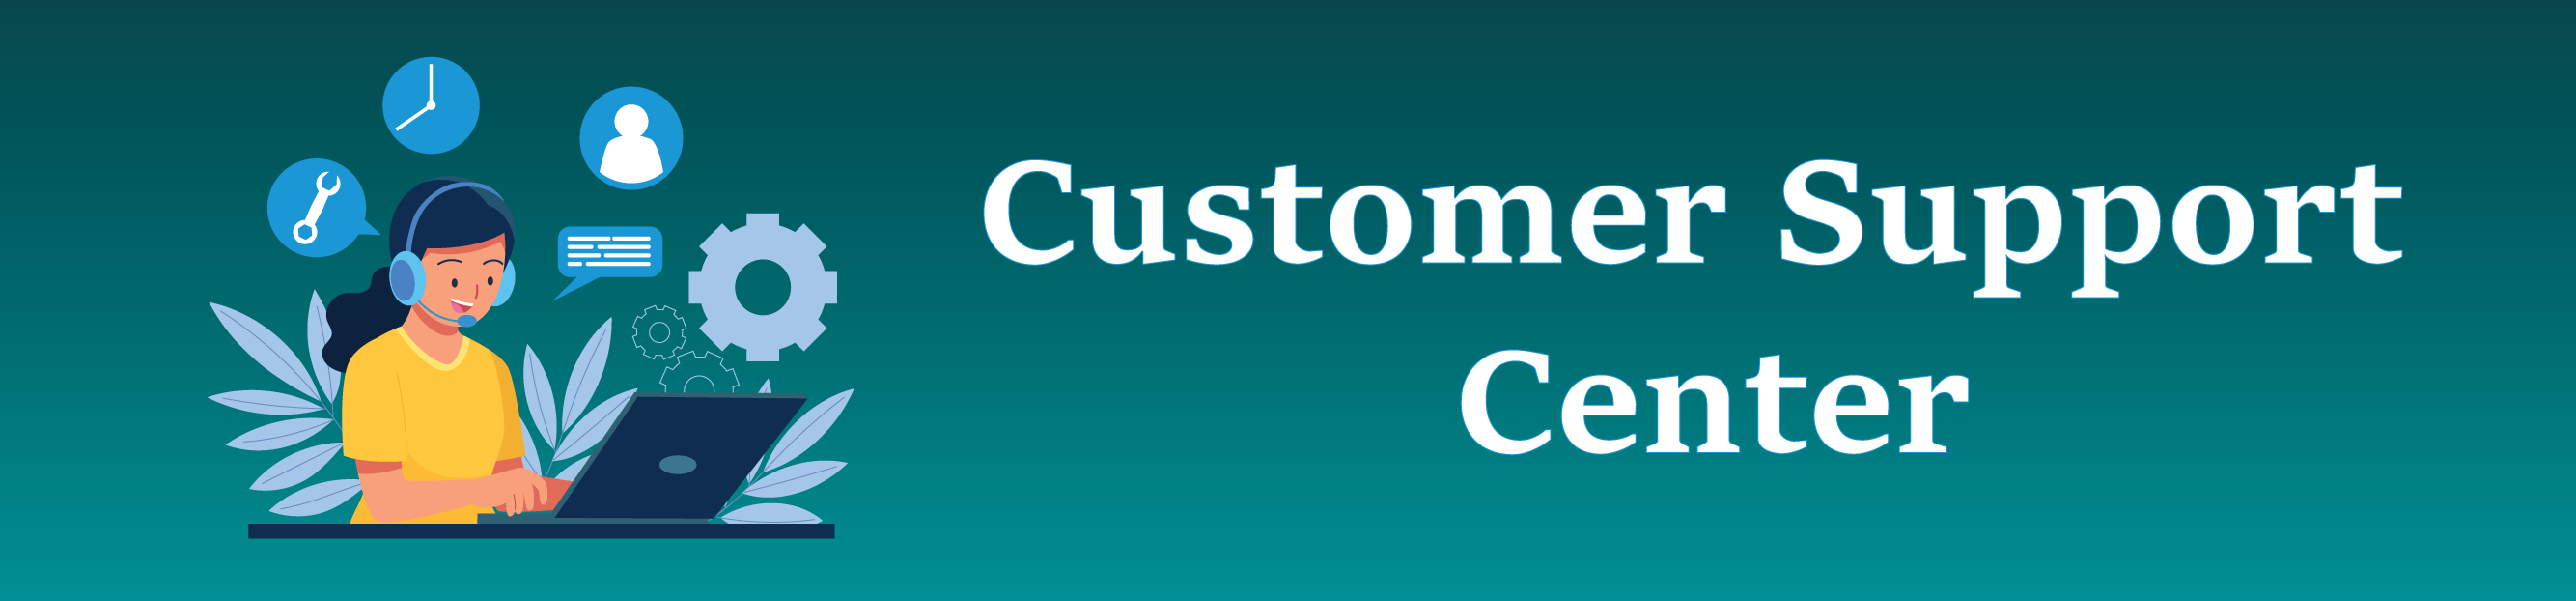 banner of customer support